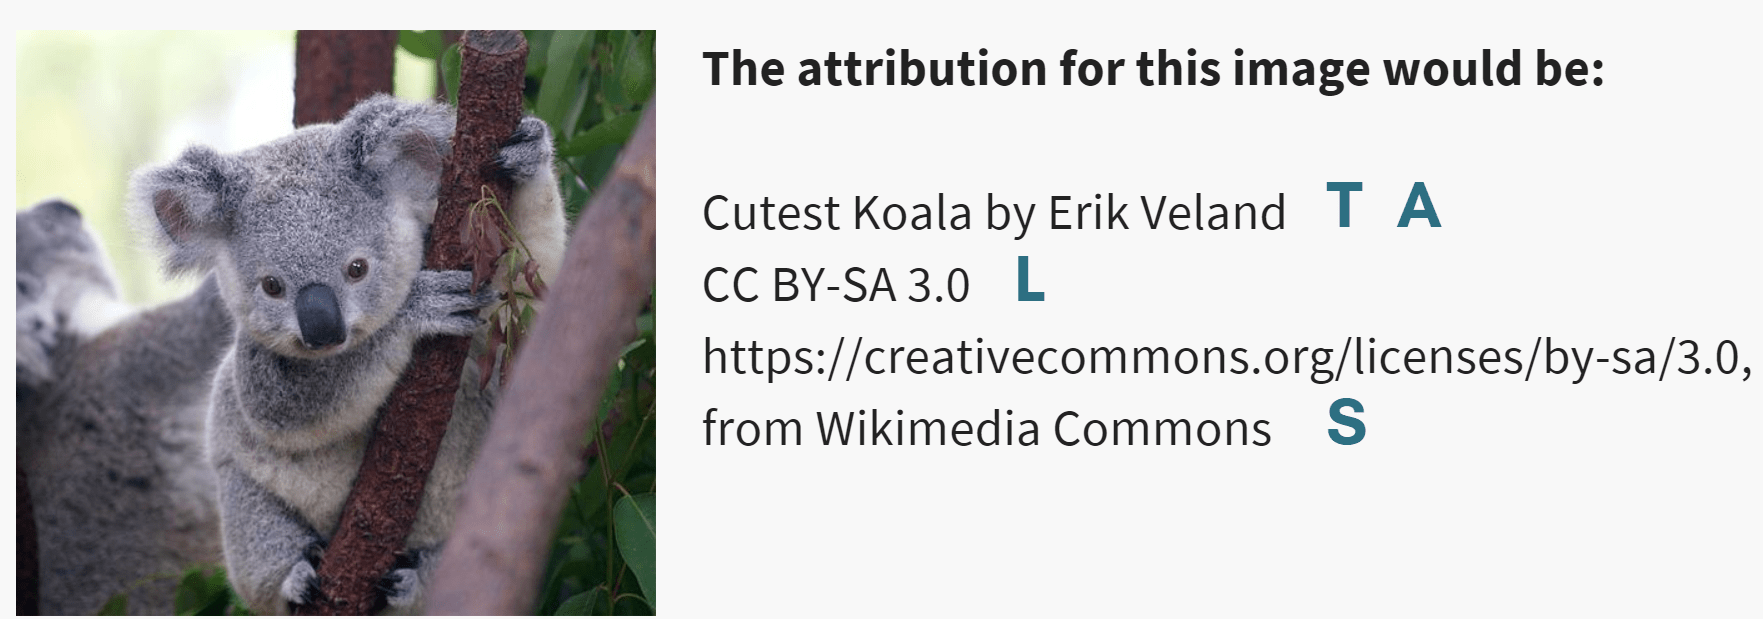 Example of how to attribute a Creative Commons image of a koala